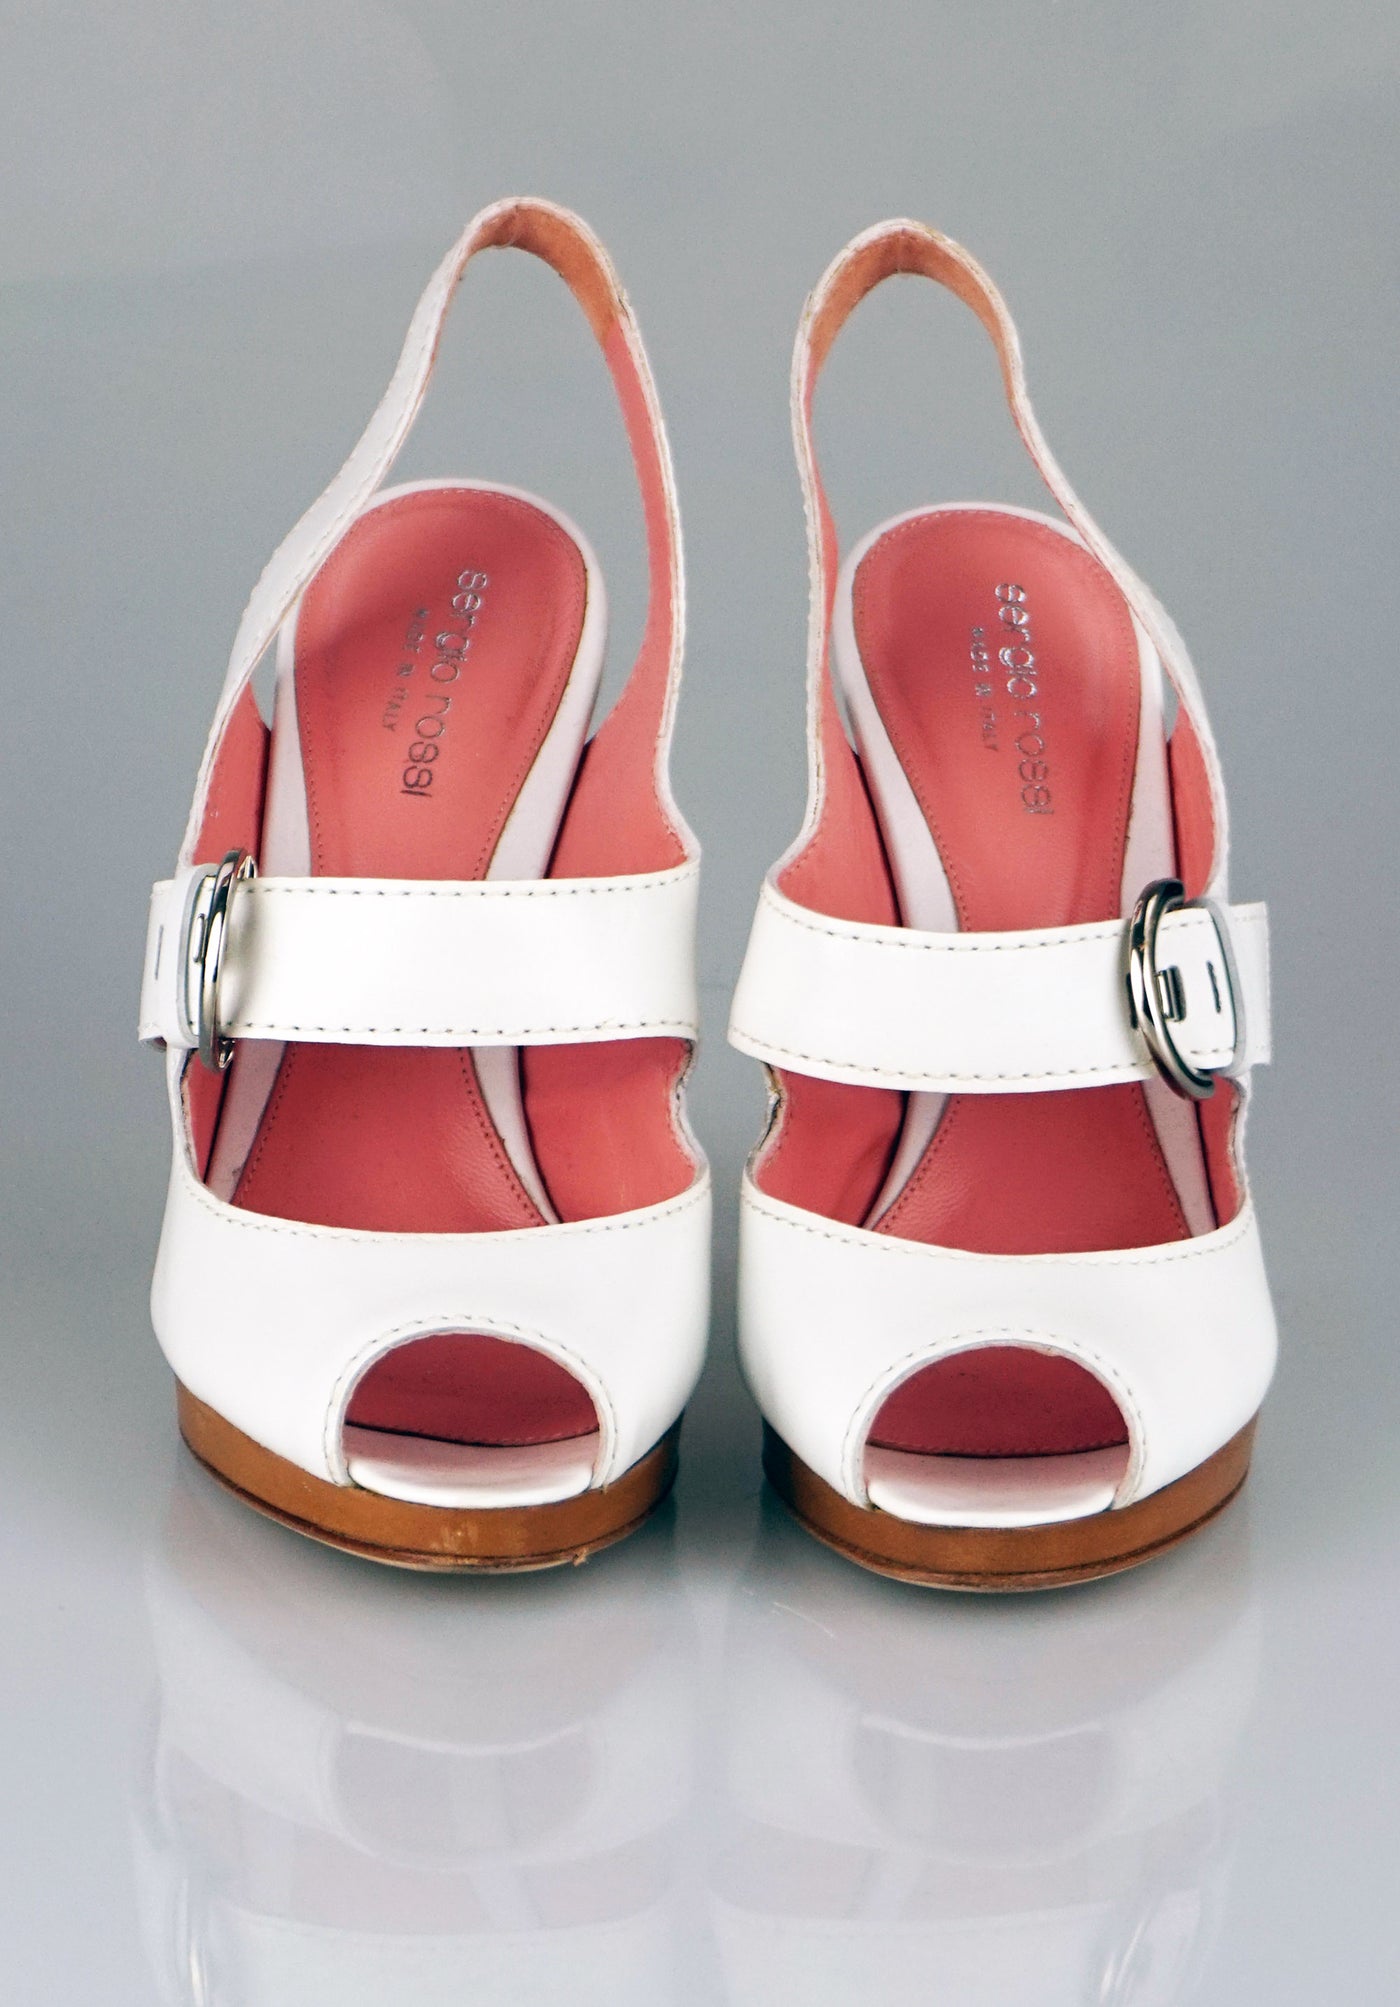 White peep toe strapped sandals